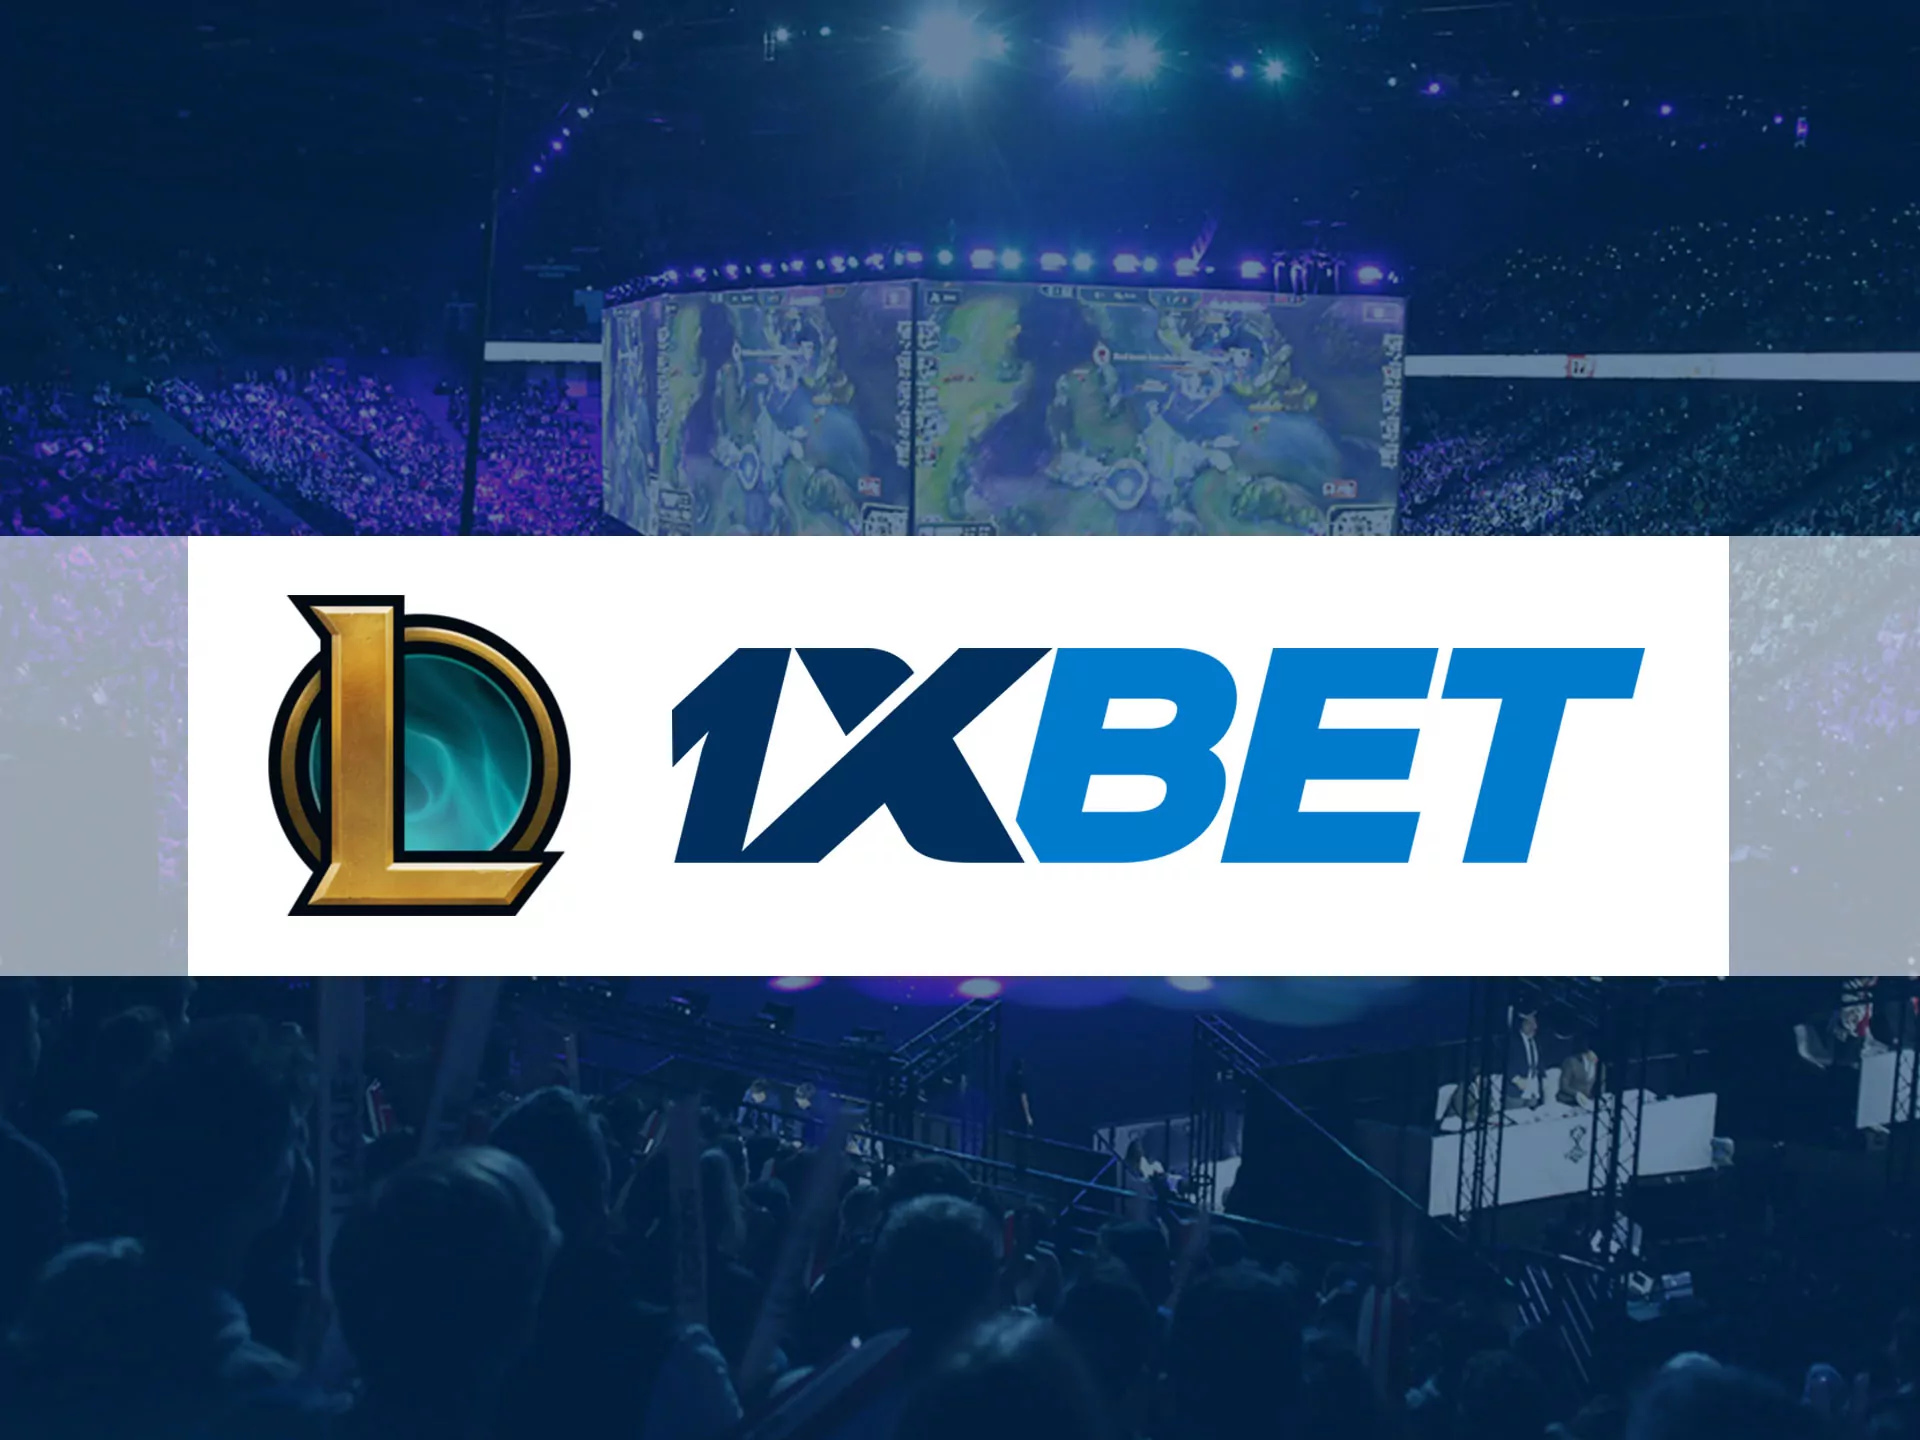 League of Legends betting on 1xbet.